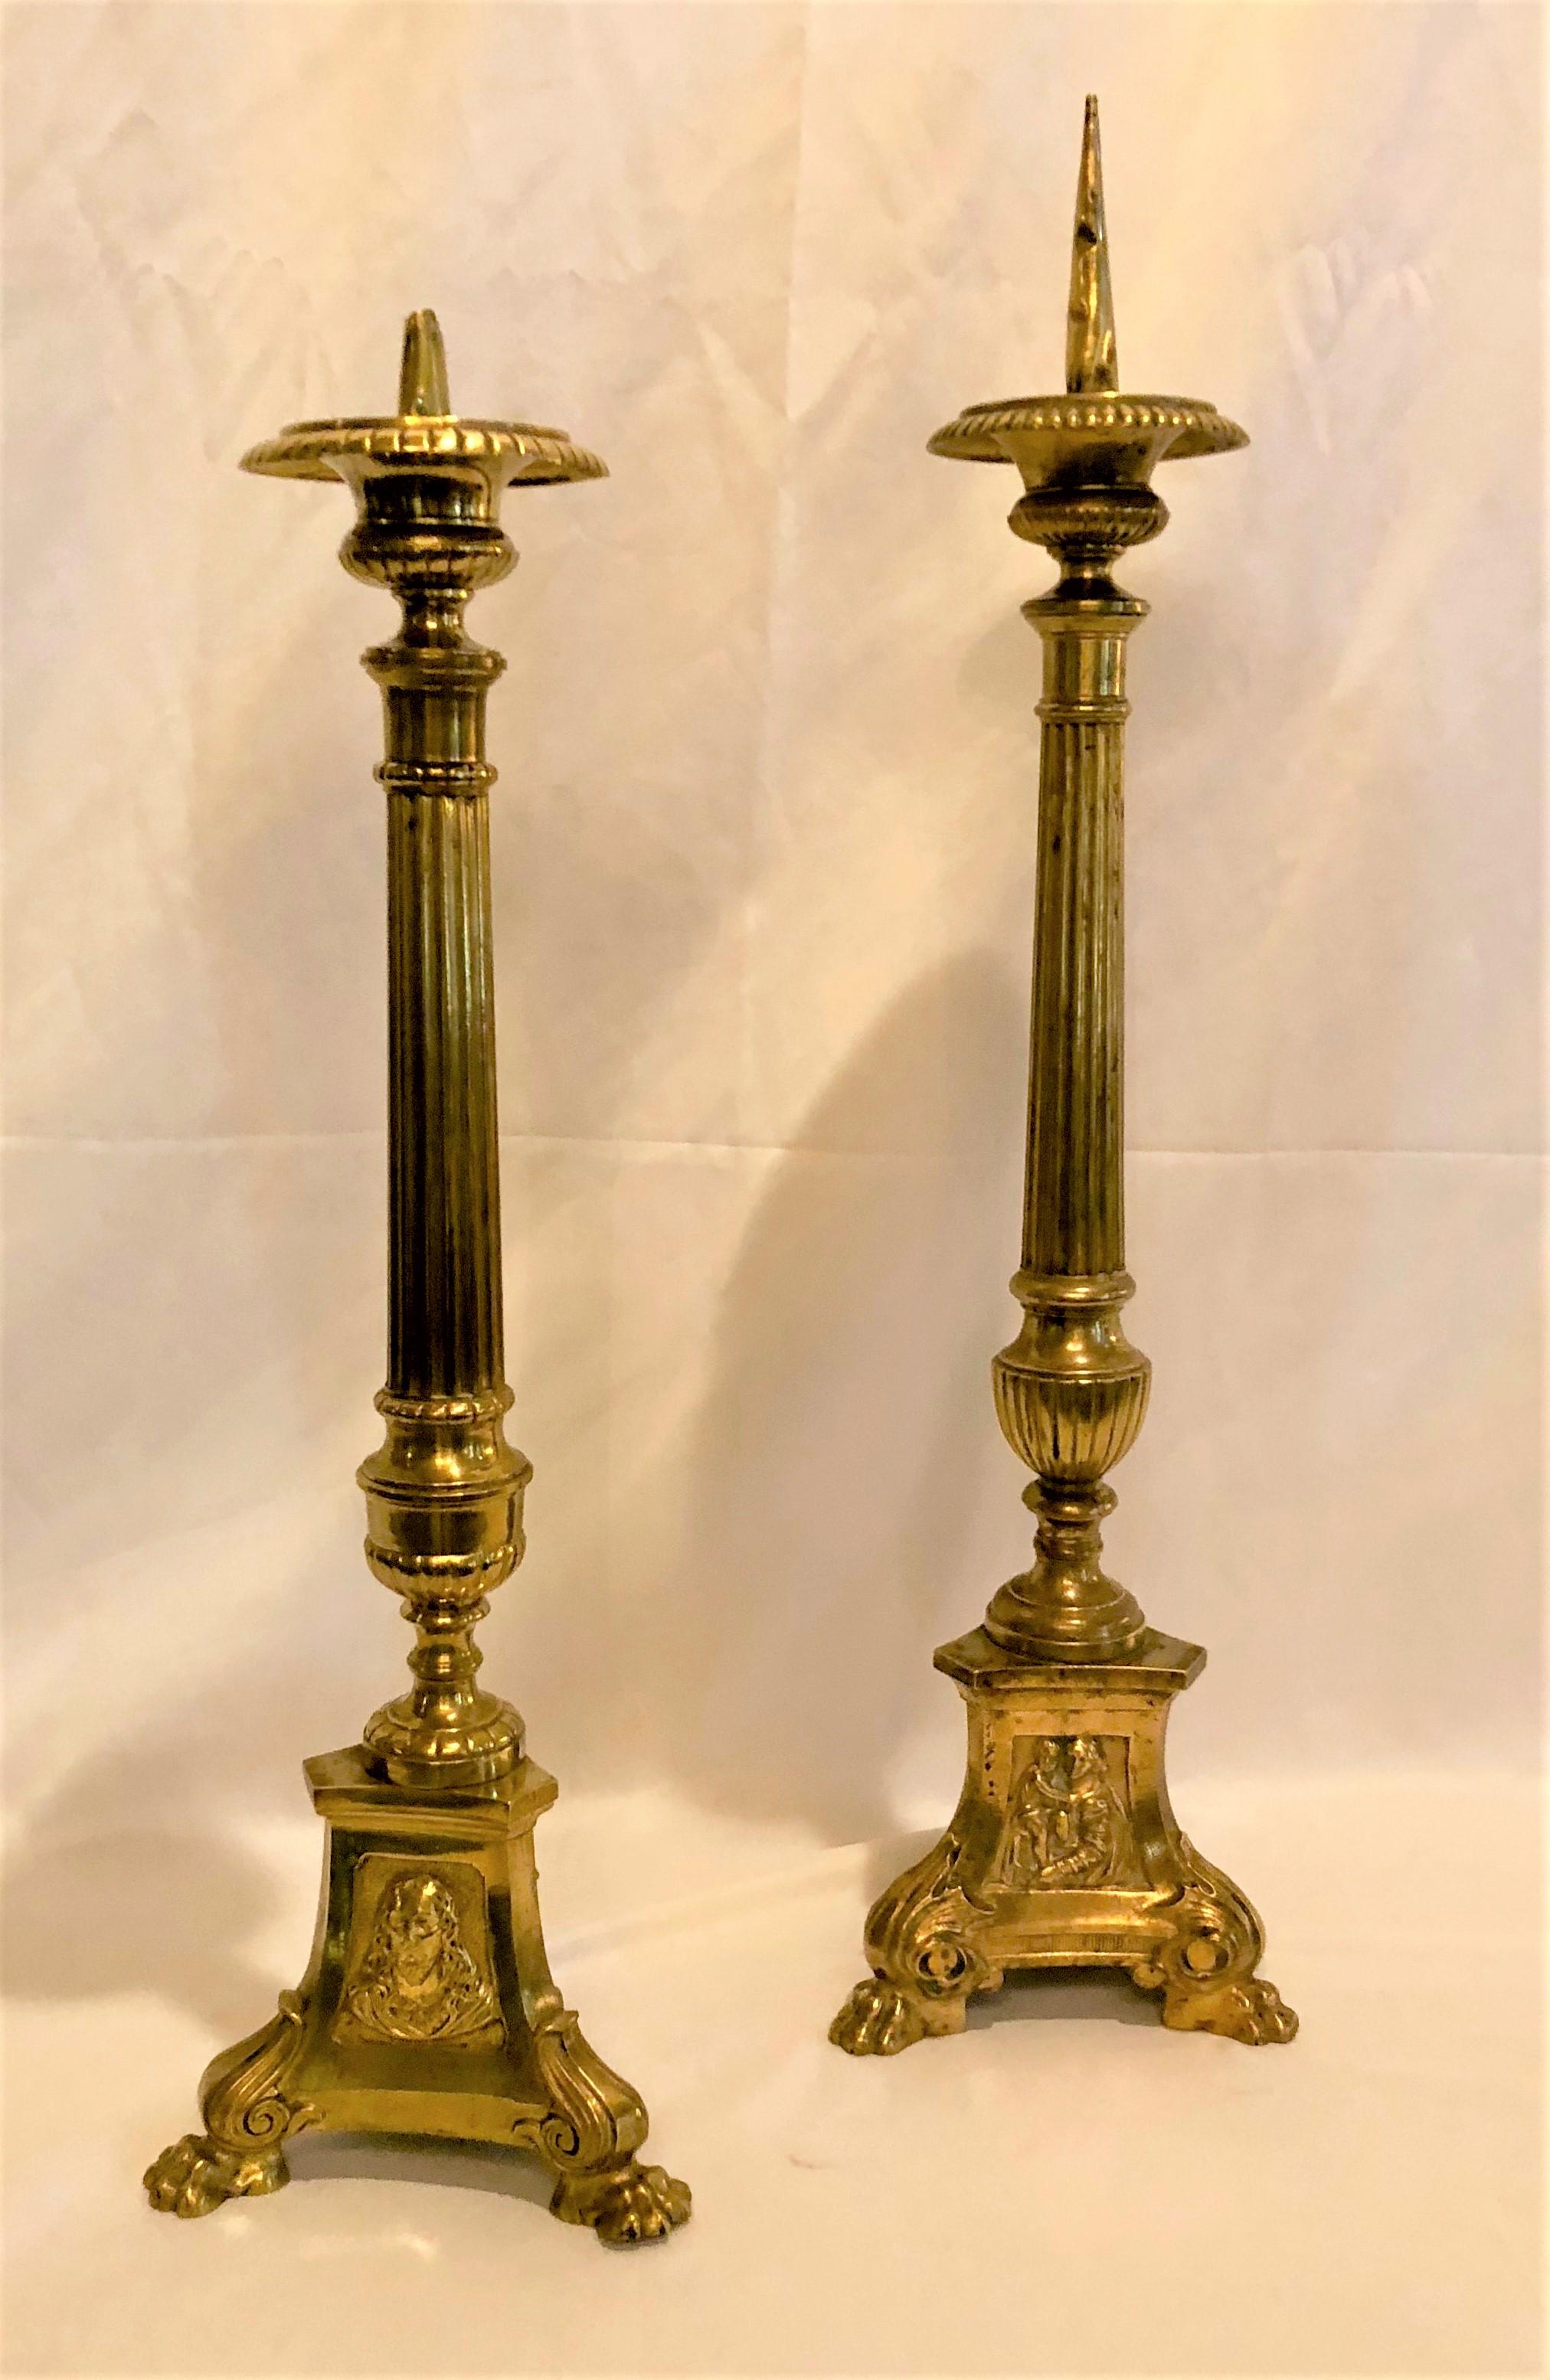 Pair of antique 18th century English brass old Gothic church candles.